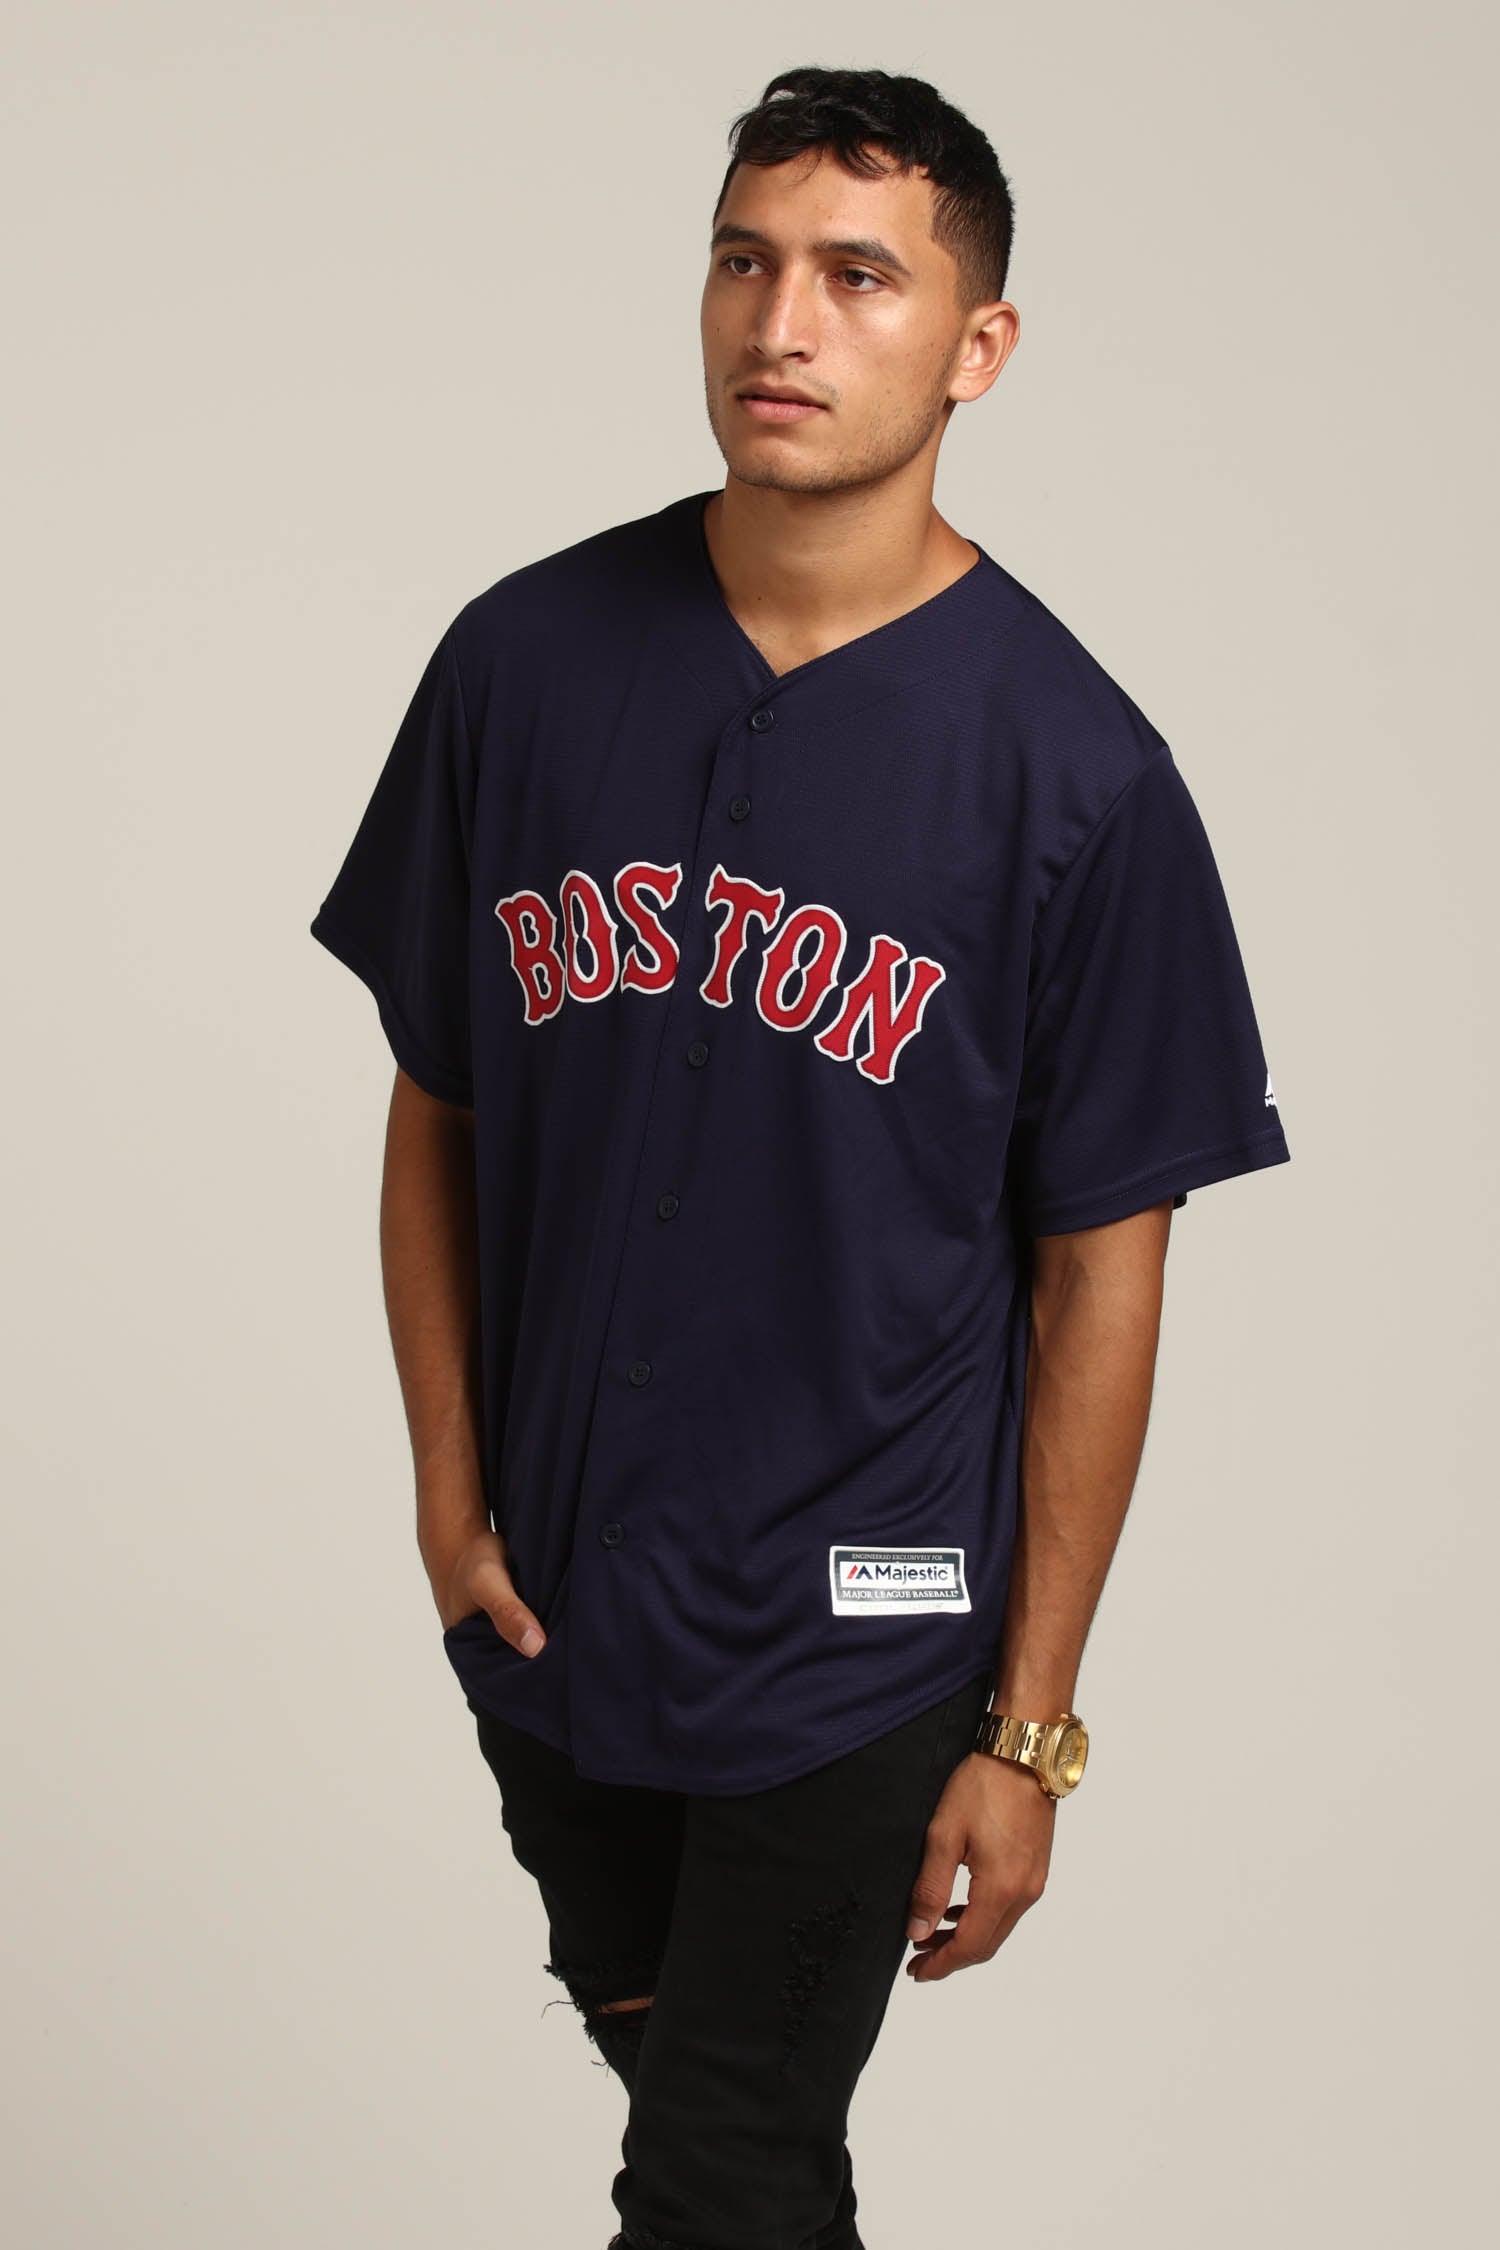 majestic red sox shirt